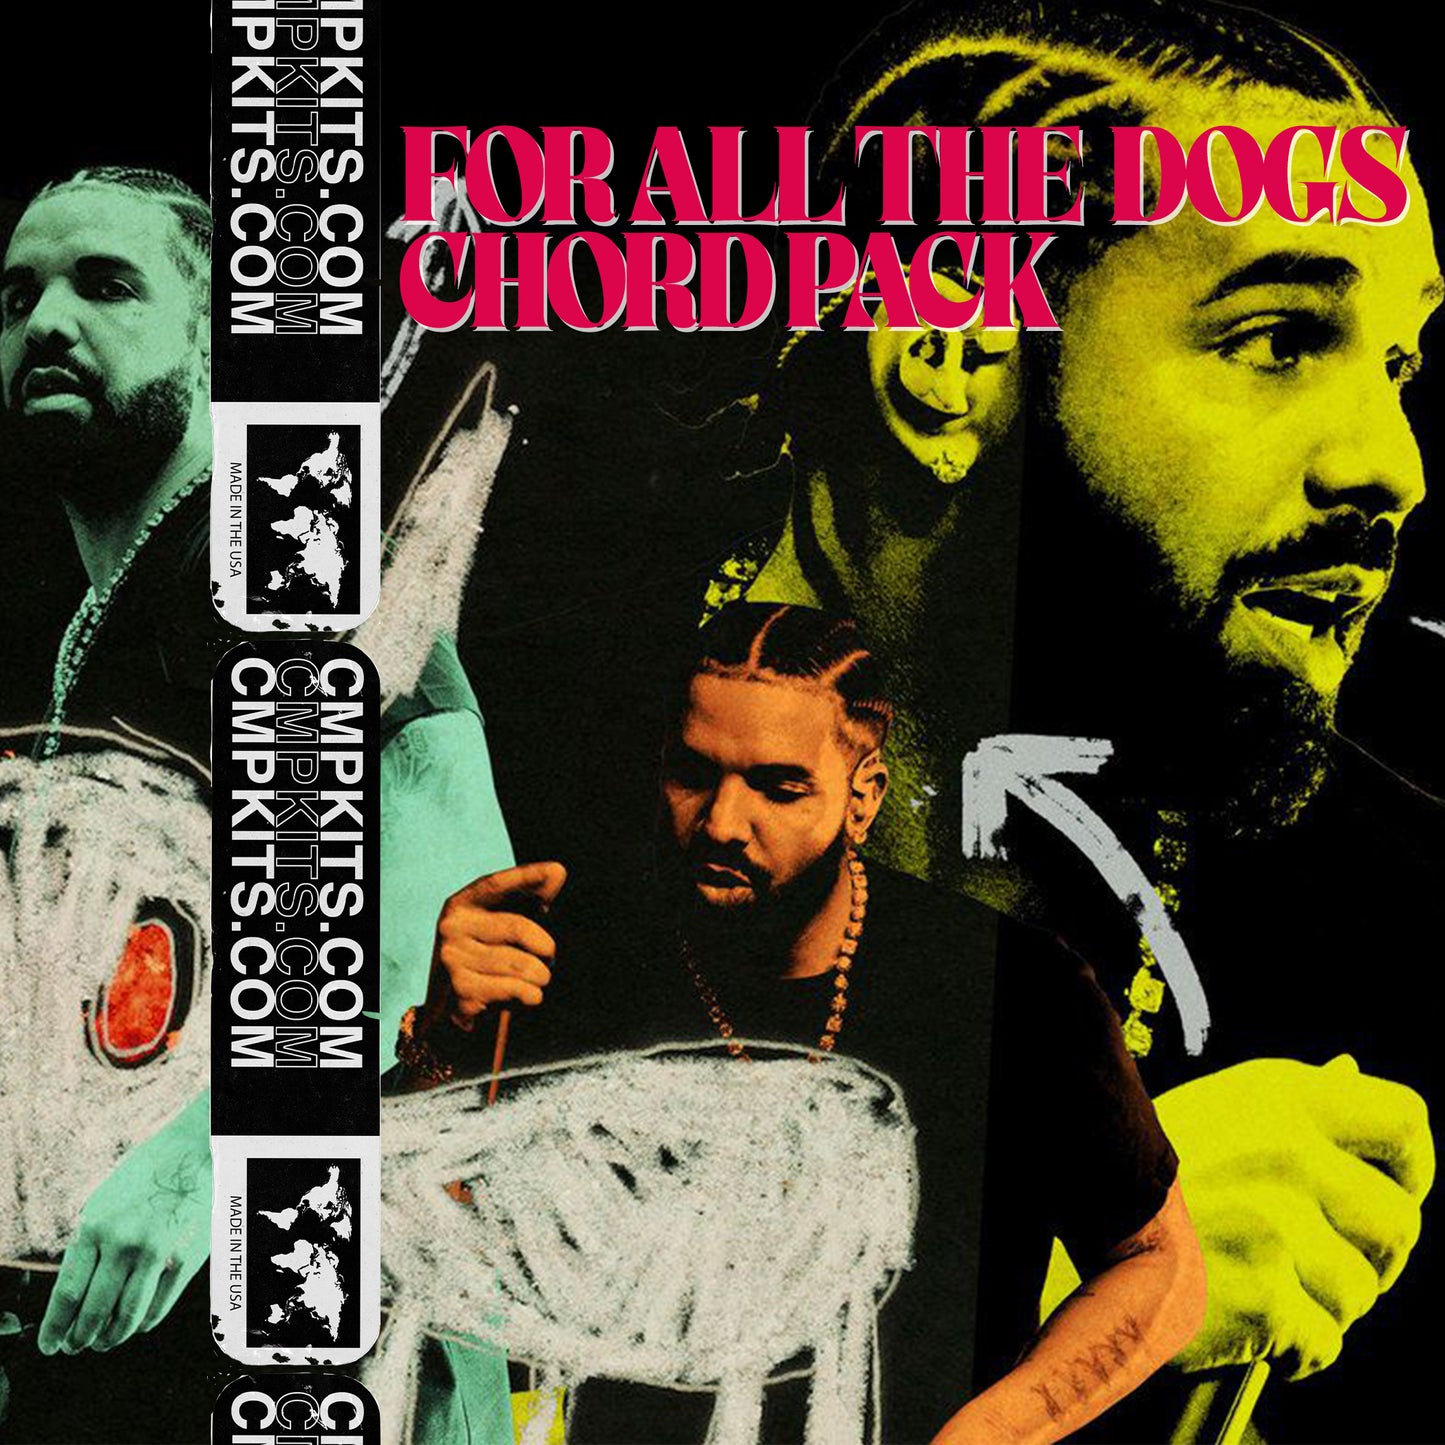 Drake "For All The Dogs" Chord Pack (Ripchord, Scaler, MIDI and MPC Chord Progressions)